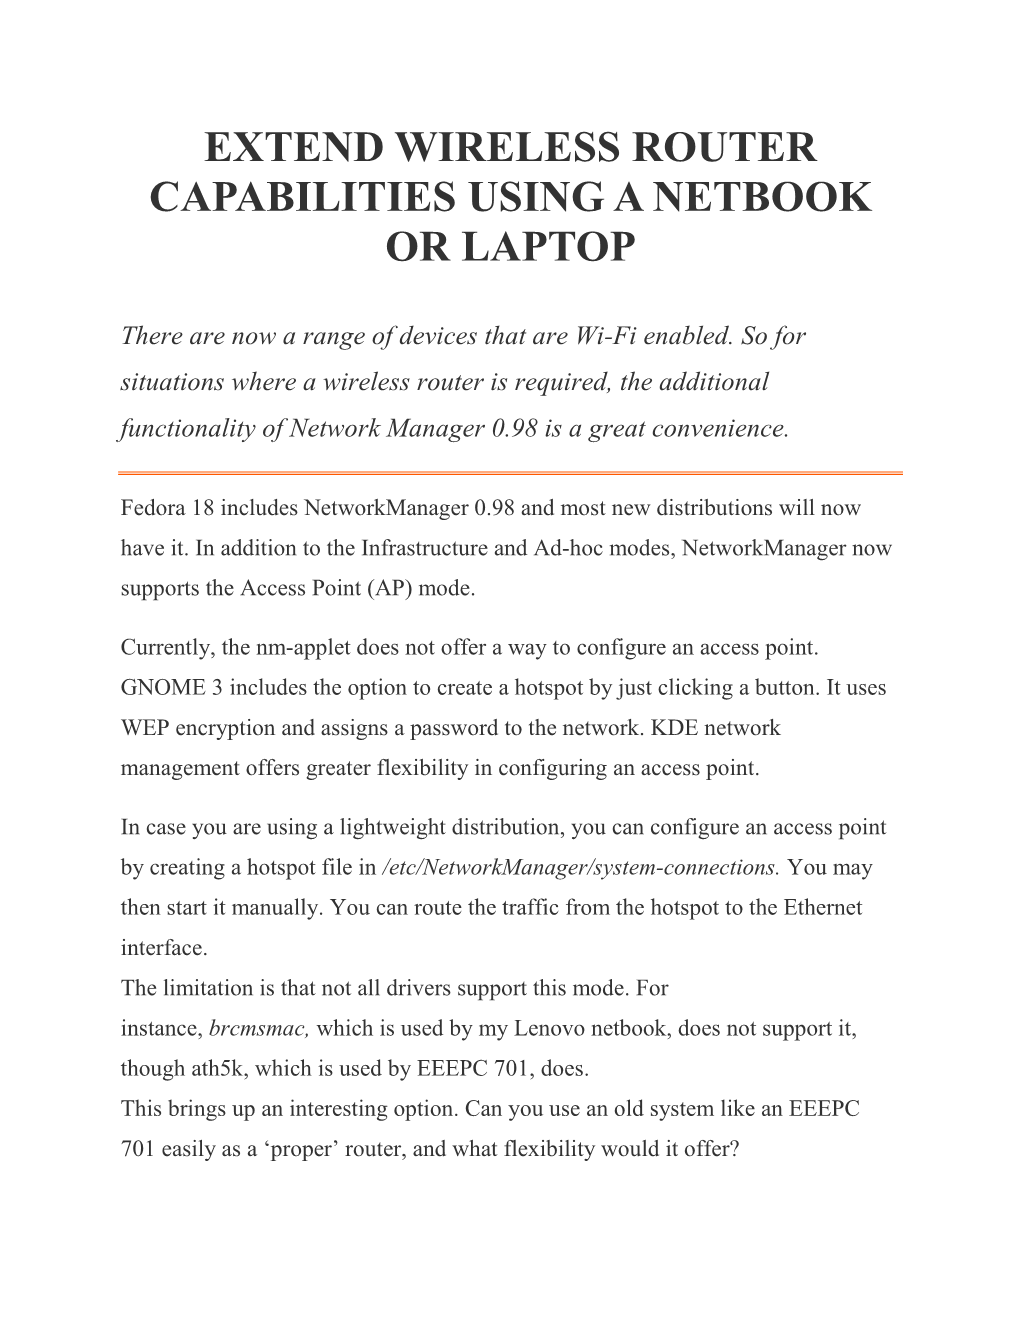 Extend Wireless Router Capabilities Using a Netbook Or Laptop